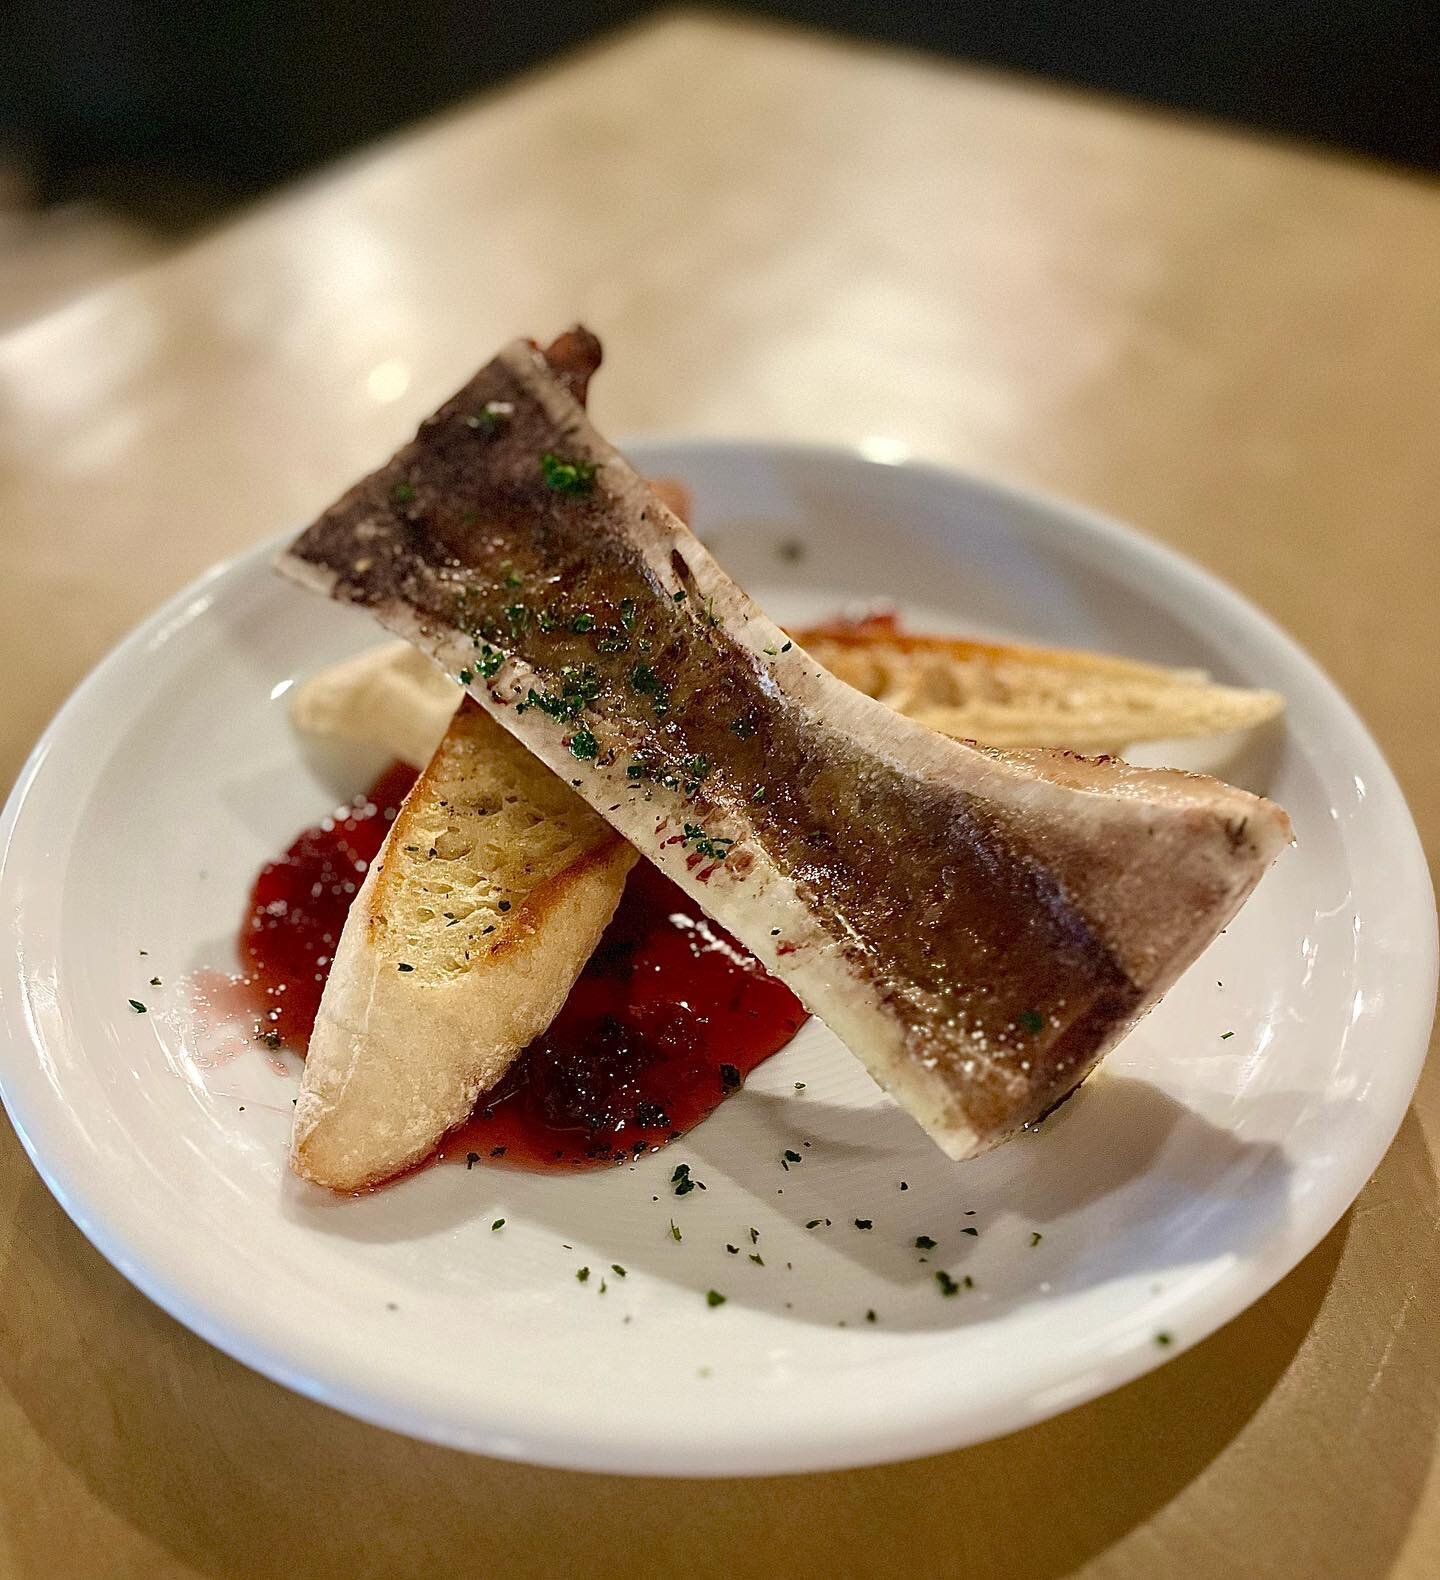 🍁It&rsquo;s feeling like fall outside so come in and have our roasted bone marrow with toast points.
.
.
.
#bonemarrow #yum #delicious #fall #fallflavors #thatfallfeeling #lostkeytap #wrightstown #foxvalley #foxcitieseats #foxcities #depere #greenba